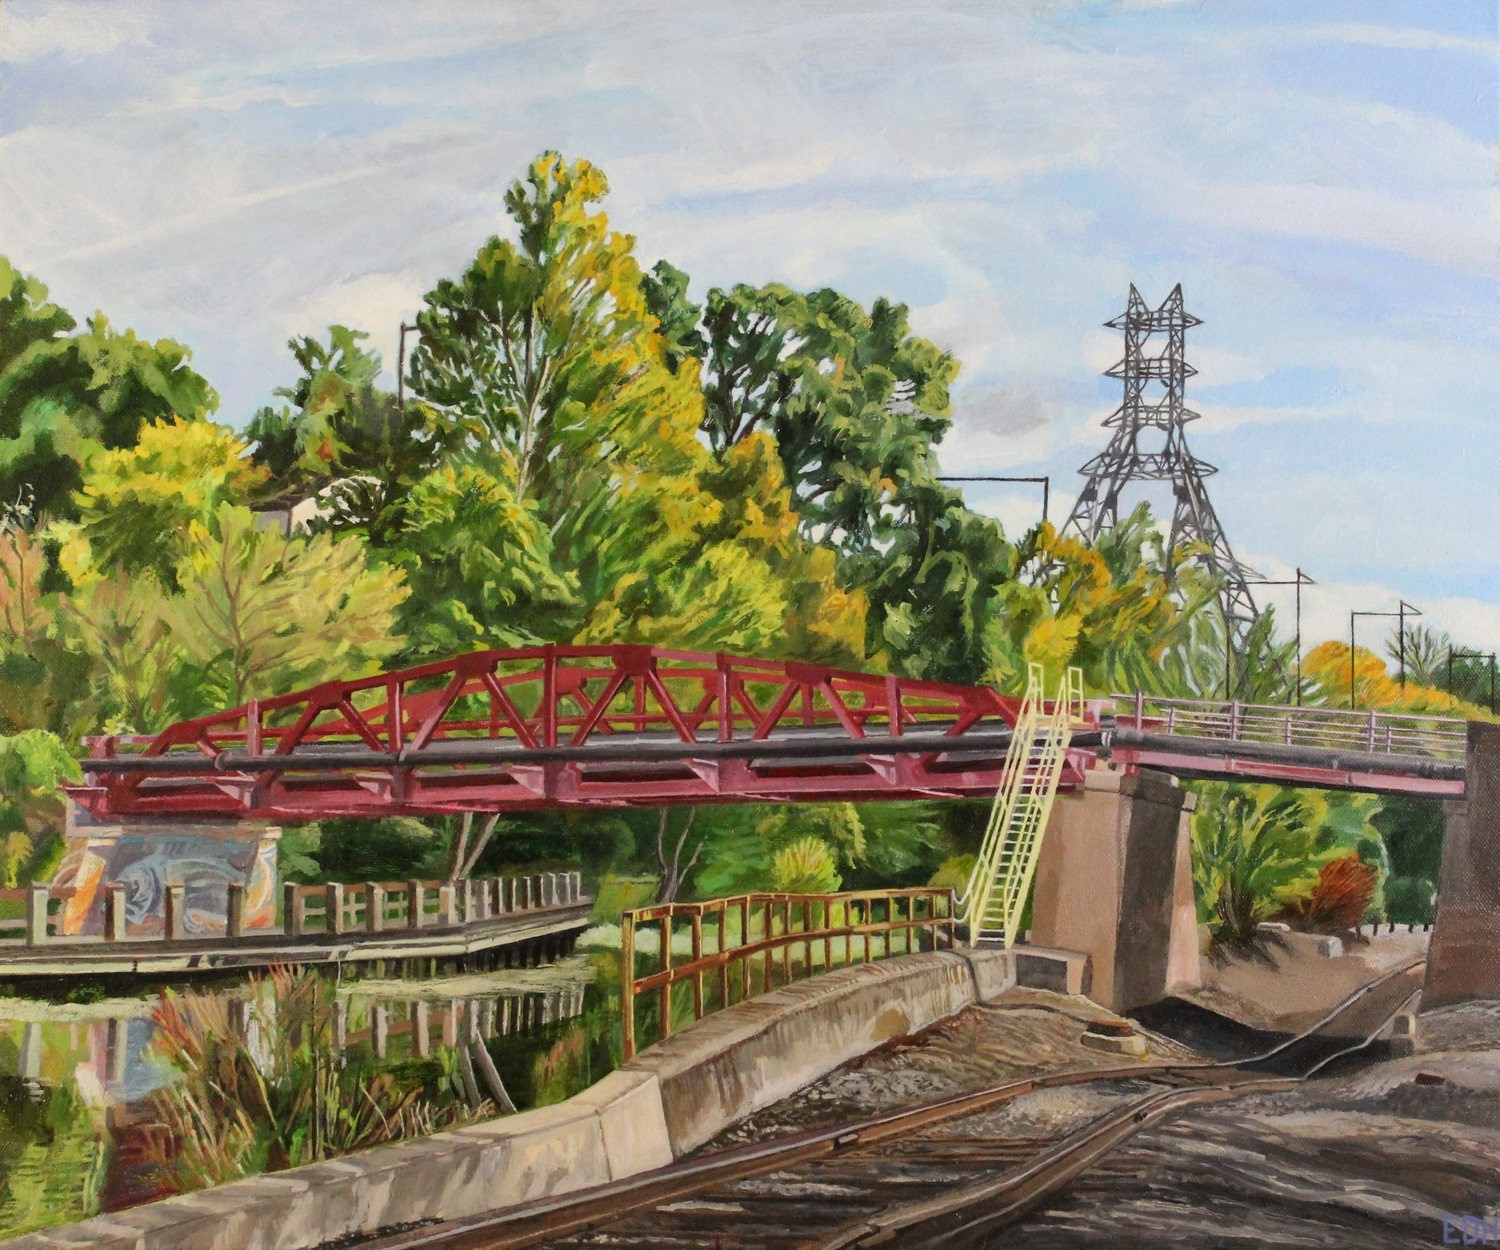 Red Bridge and Railroad Tracks, Manayunk Canal